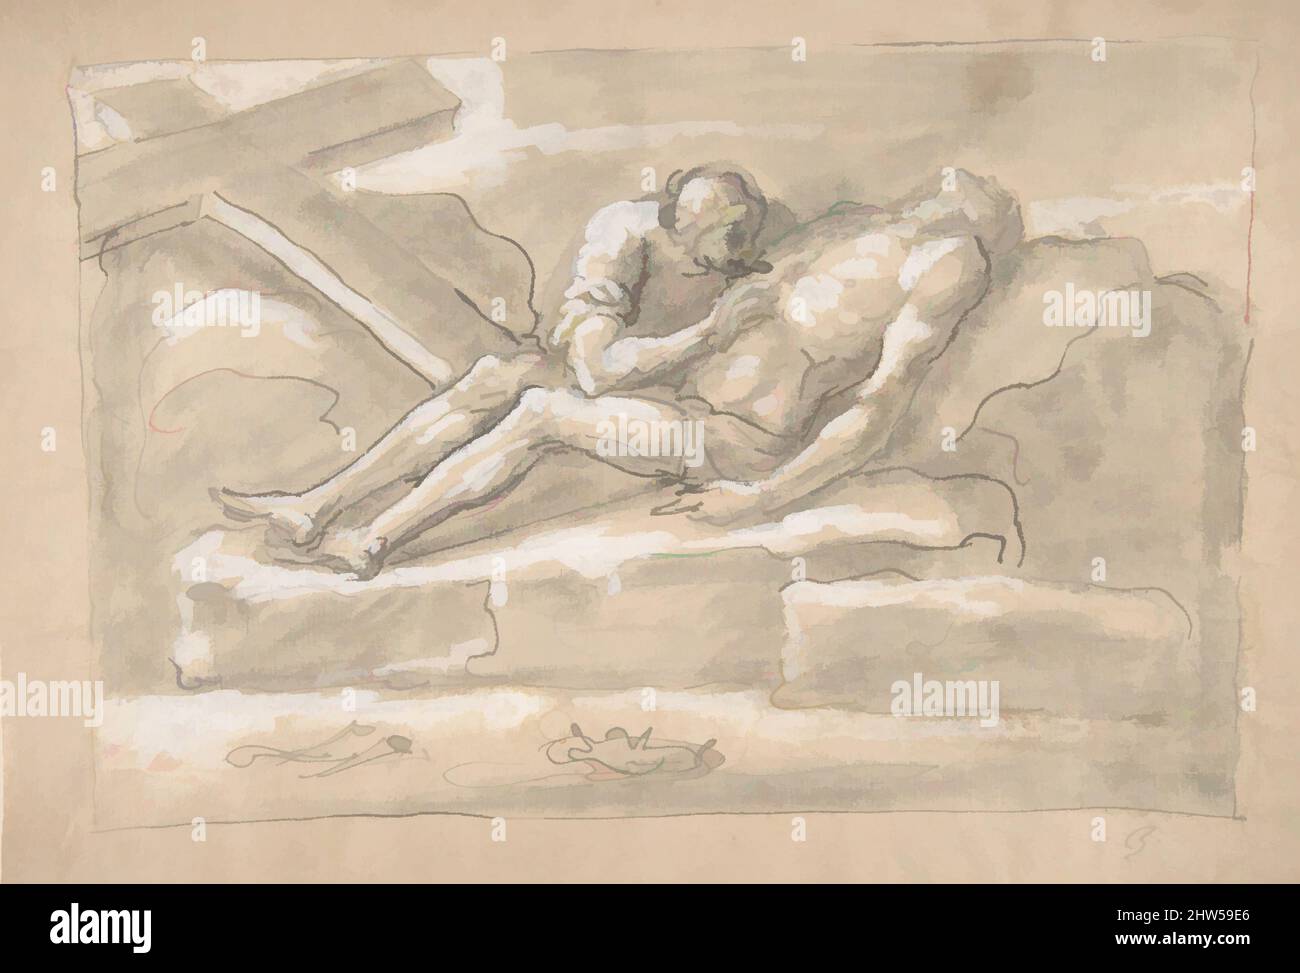 Art inspired by The Dead Christ Mourned by the Magdalen Who Venerates His Side Wound., 1787–1863, Pen and brown ink, brush and gray-brown wash, highlighted with white gouache on cream paper, sheet: 8 1/2 x 12 1/4 in. (21.6 x 31.1 cm), Drawings, Fortunato Duranti (Italian, 1787–1863, Classic works modernized by Artotop with a splash of modernity. Shapes, color and value, eye-catching visual impact on art. Emotions through freedom of artworks in a contemporary way. A timeless message pursuing a wildly creative new direction. Artists turning to the digital medium and creating the Artotop NFT Stock Photo